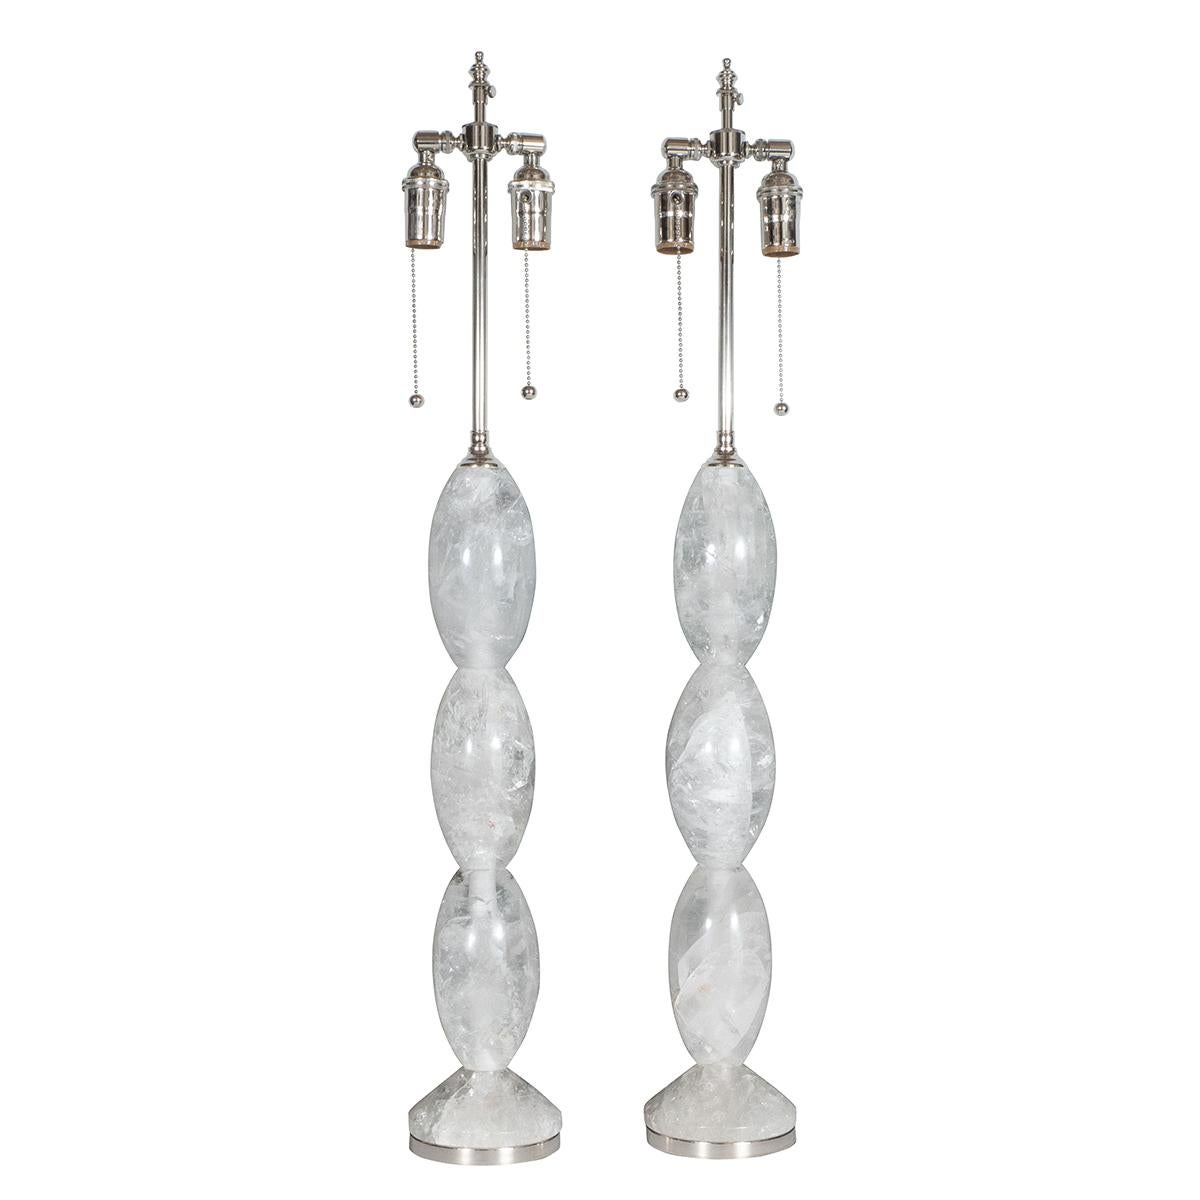 Pair of nickel table lamps composed of hand-cut and polished oval-shaped rock crystal elements by Marcelo Bessa for Spark Interior.

-This item is made of natural materials in excellent condition. There may be inherent flaws to the stone that are